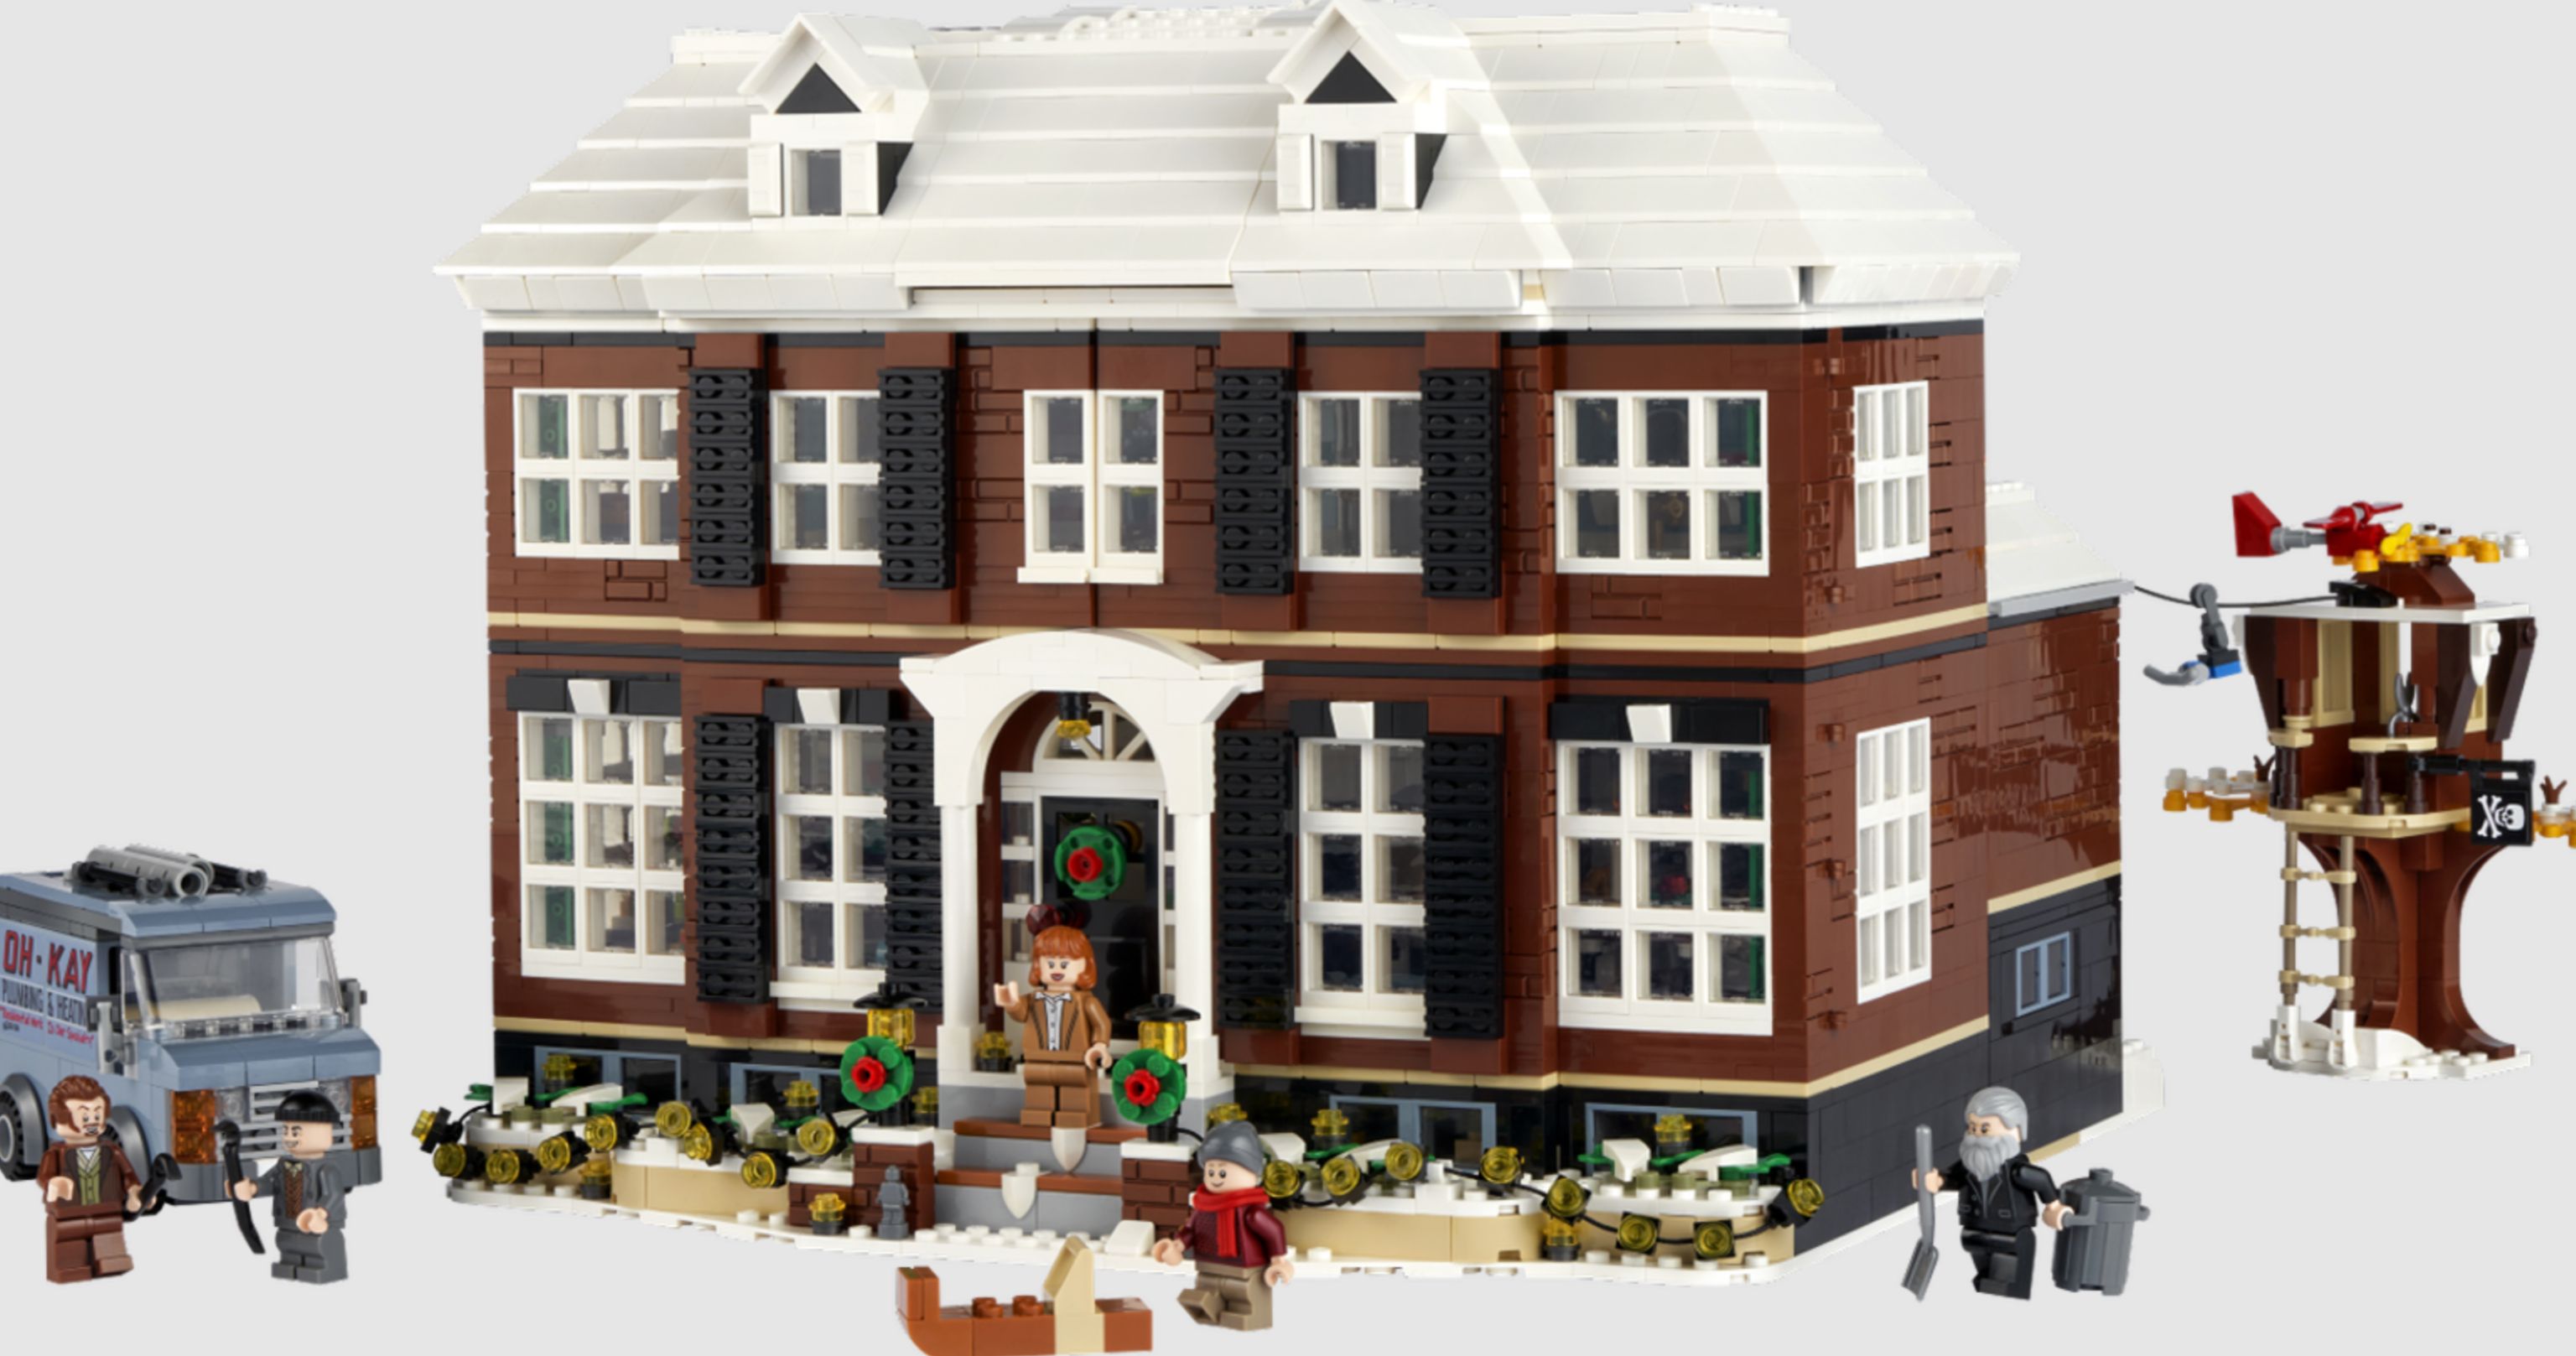 Home Alone LEGO Set Arrives Just in Time for the Holiday Season